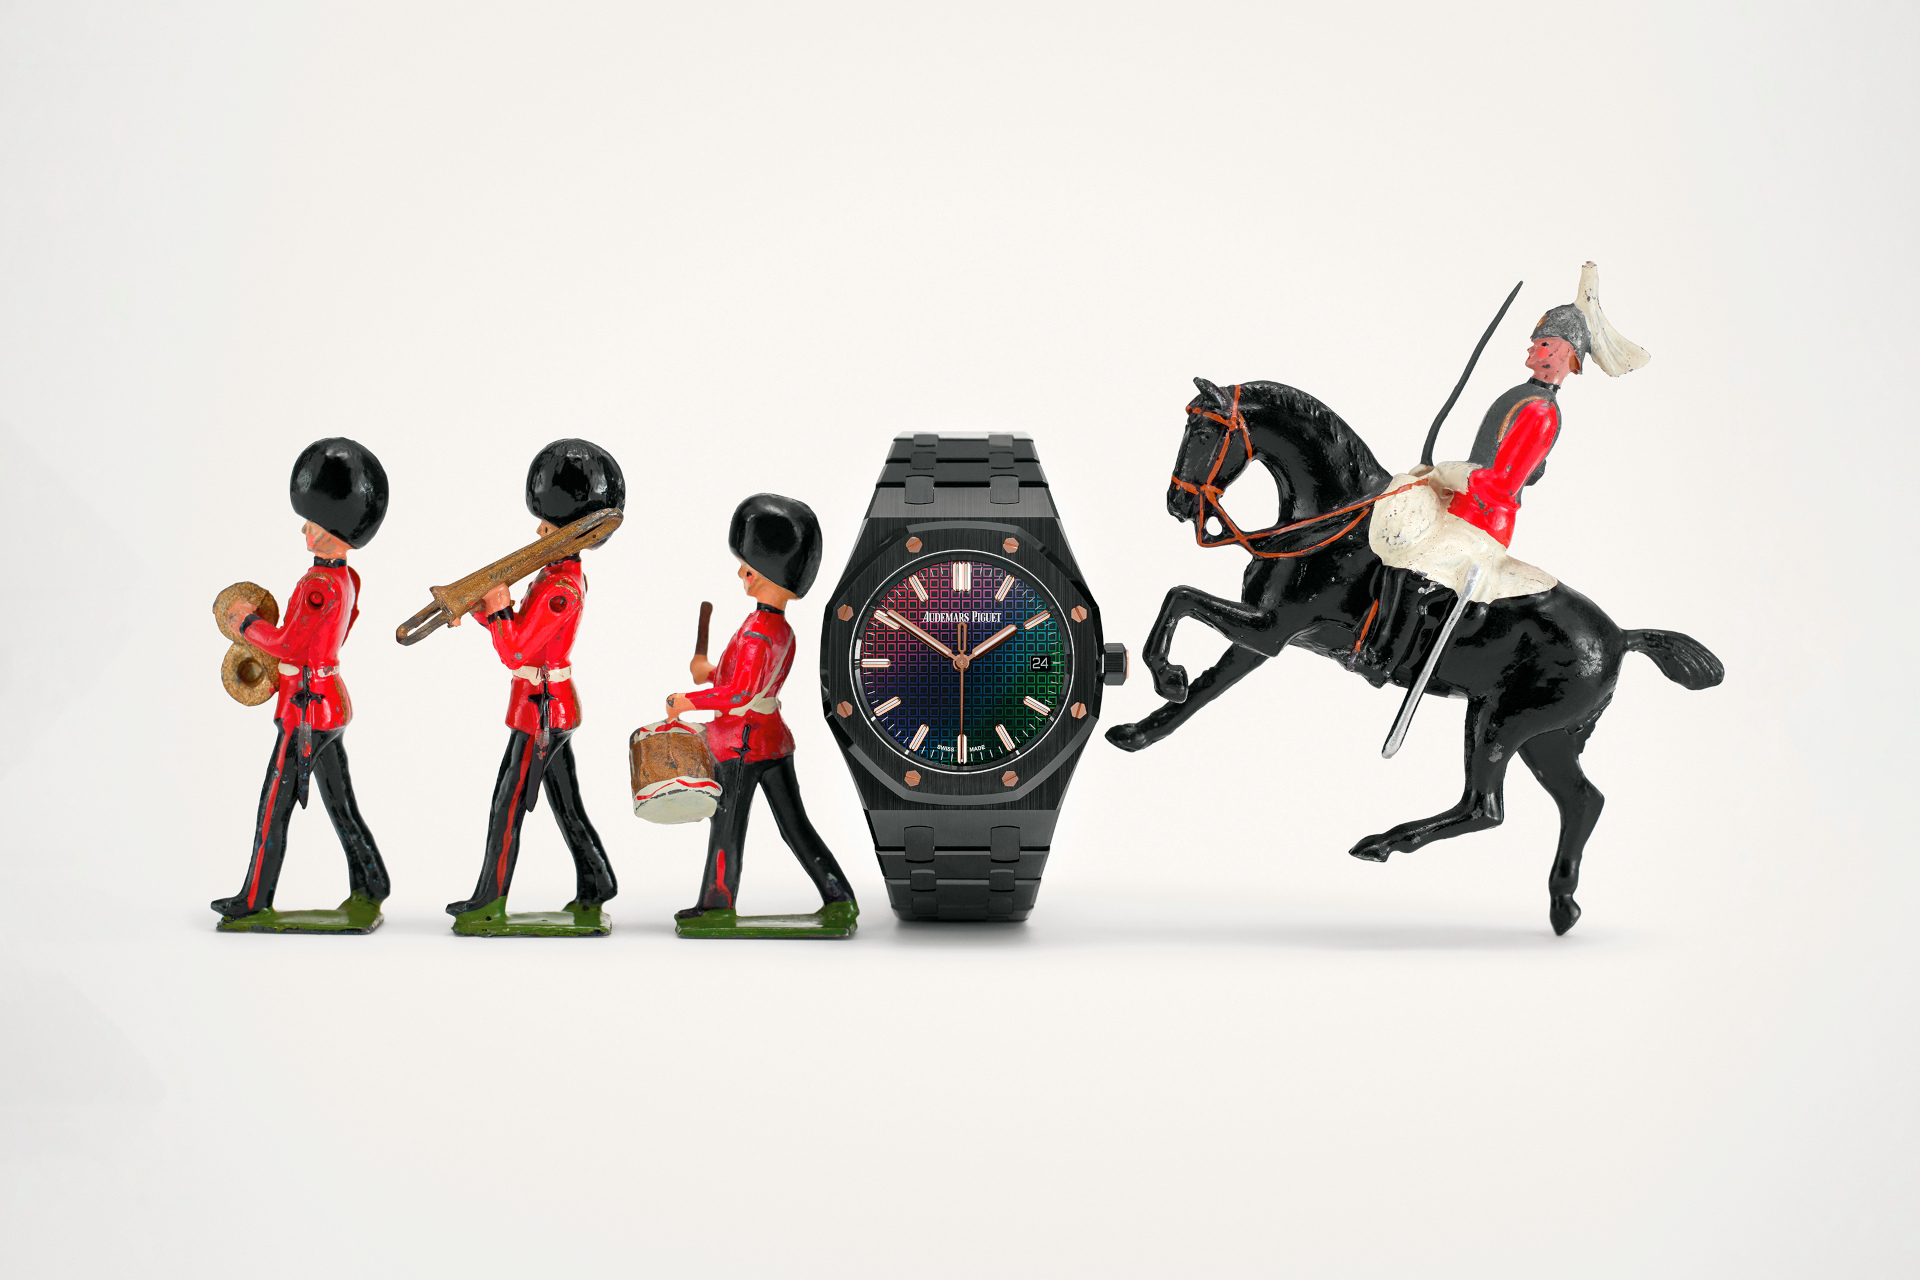 Toy soldiers with a watch